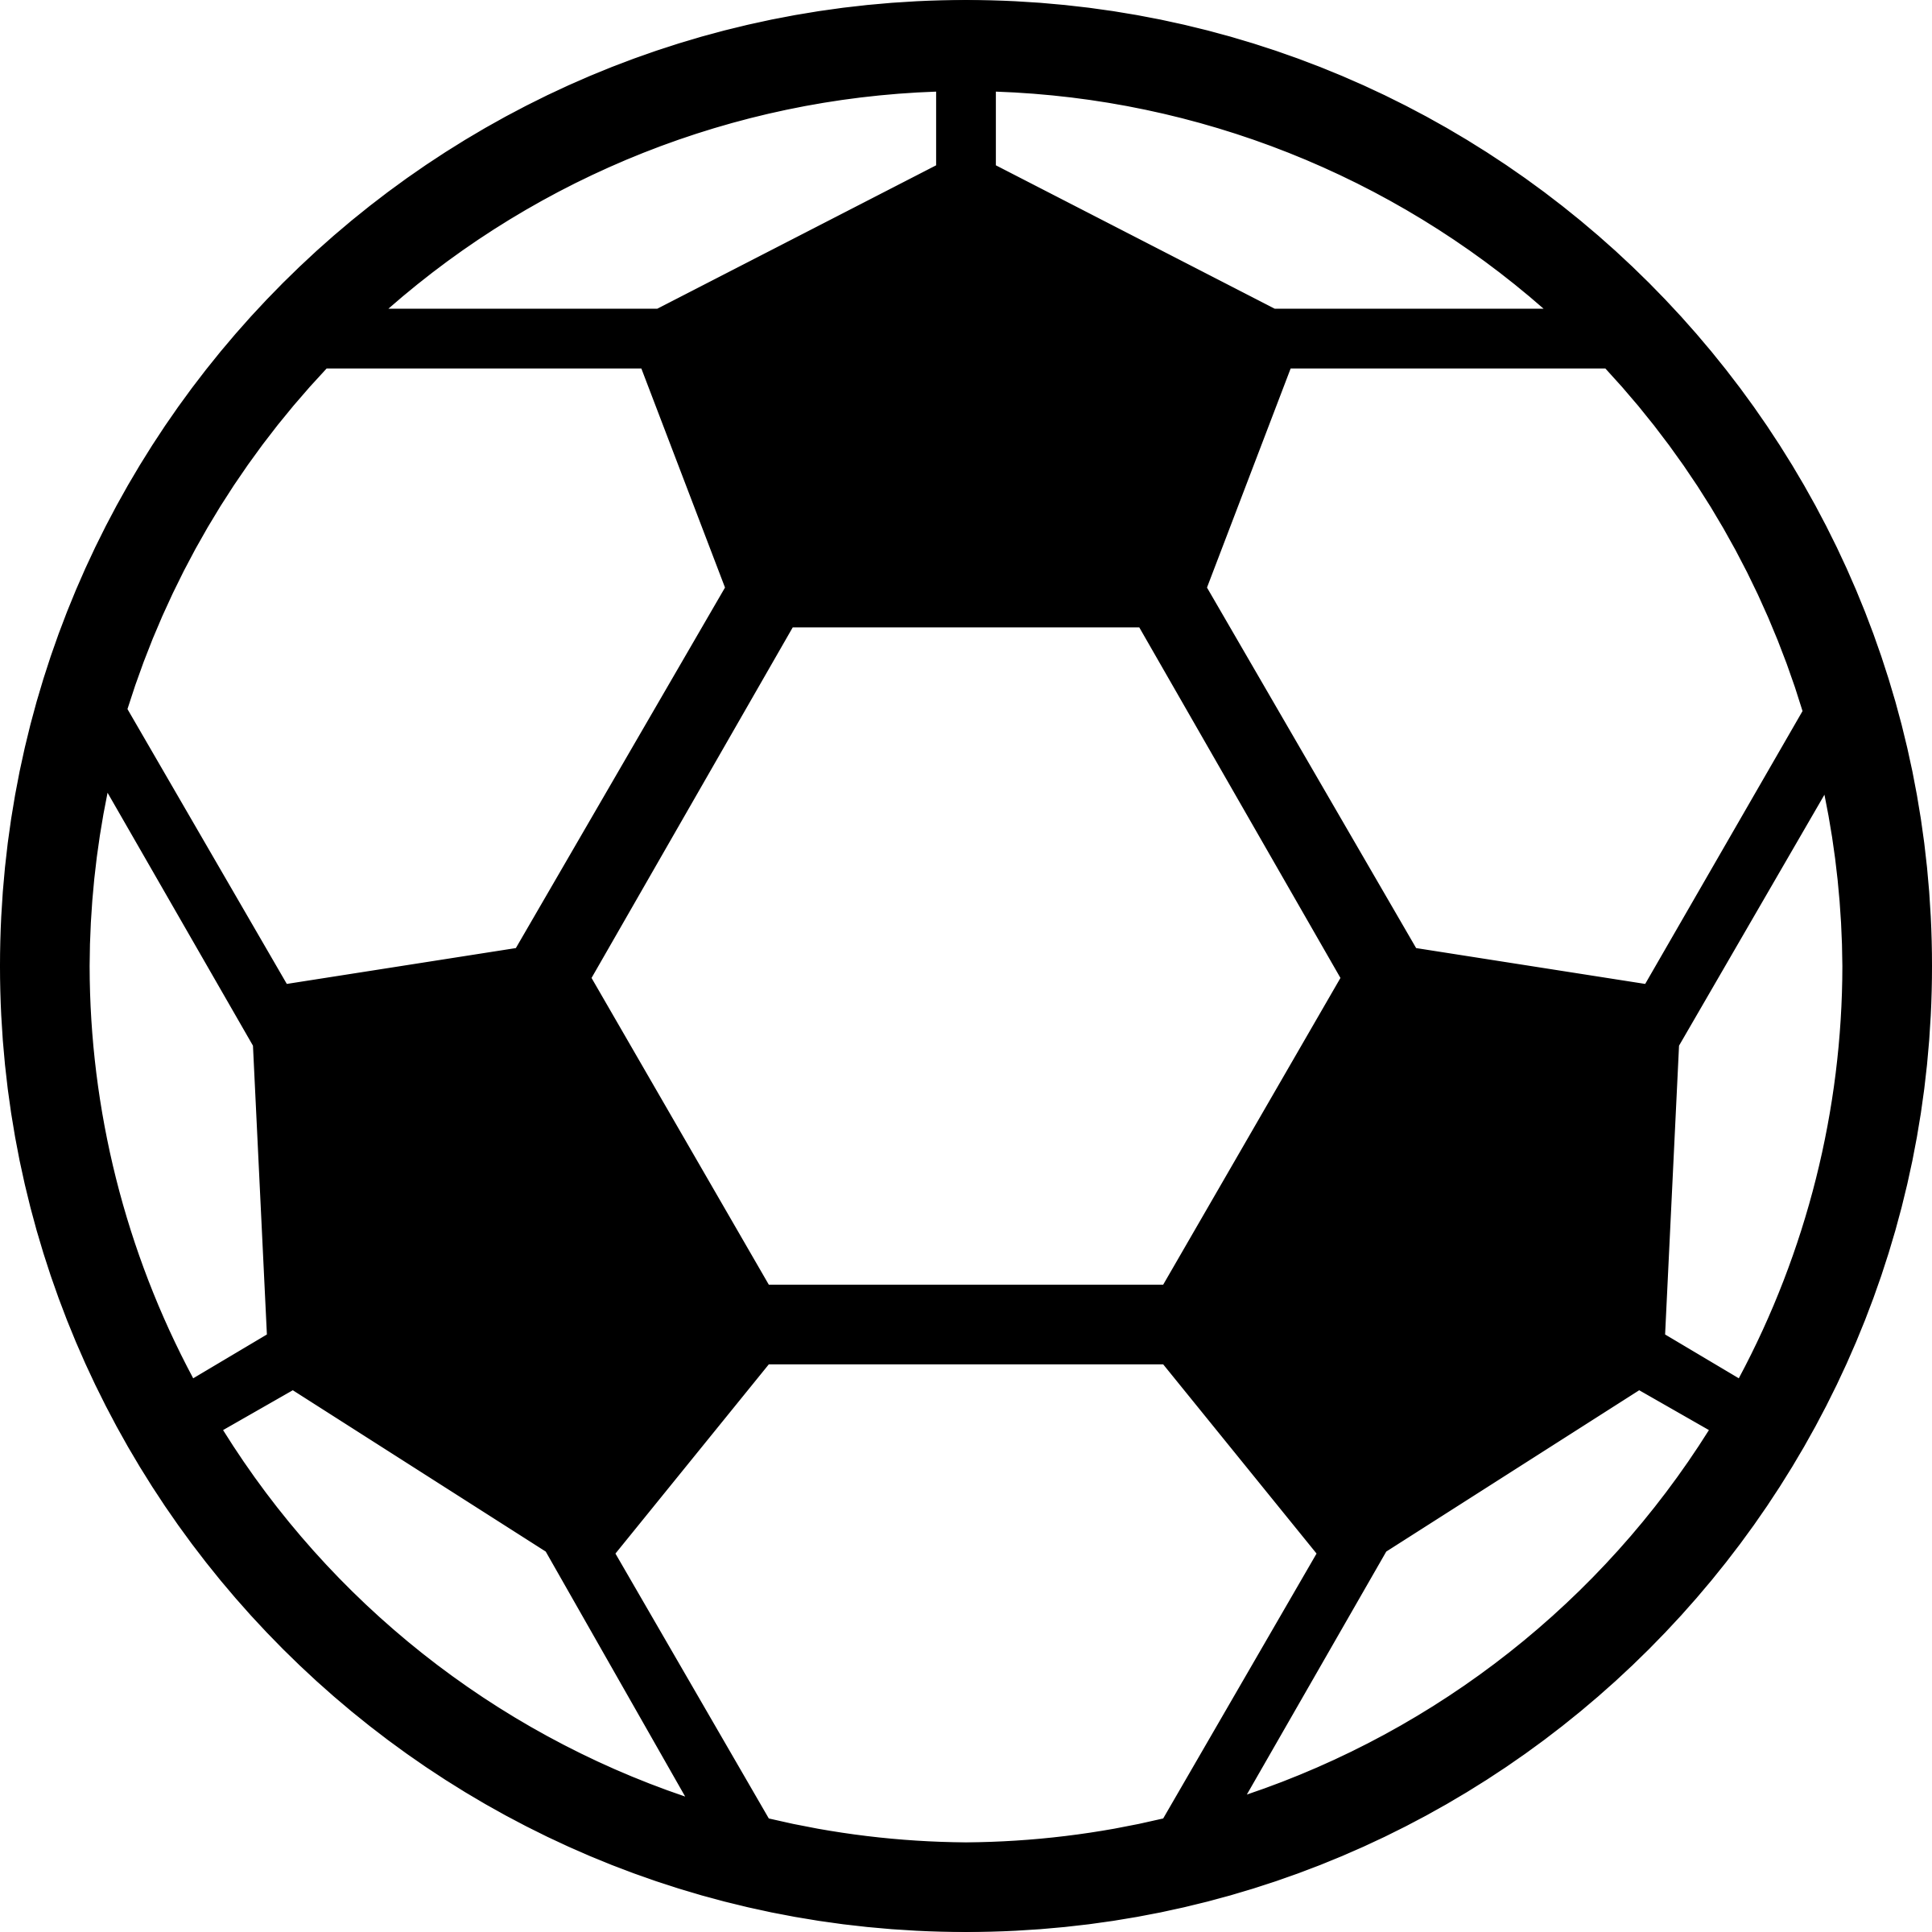 Soccer Ball Clipart - 66 cliparts